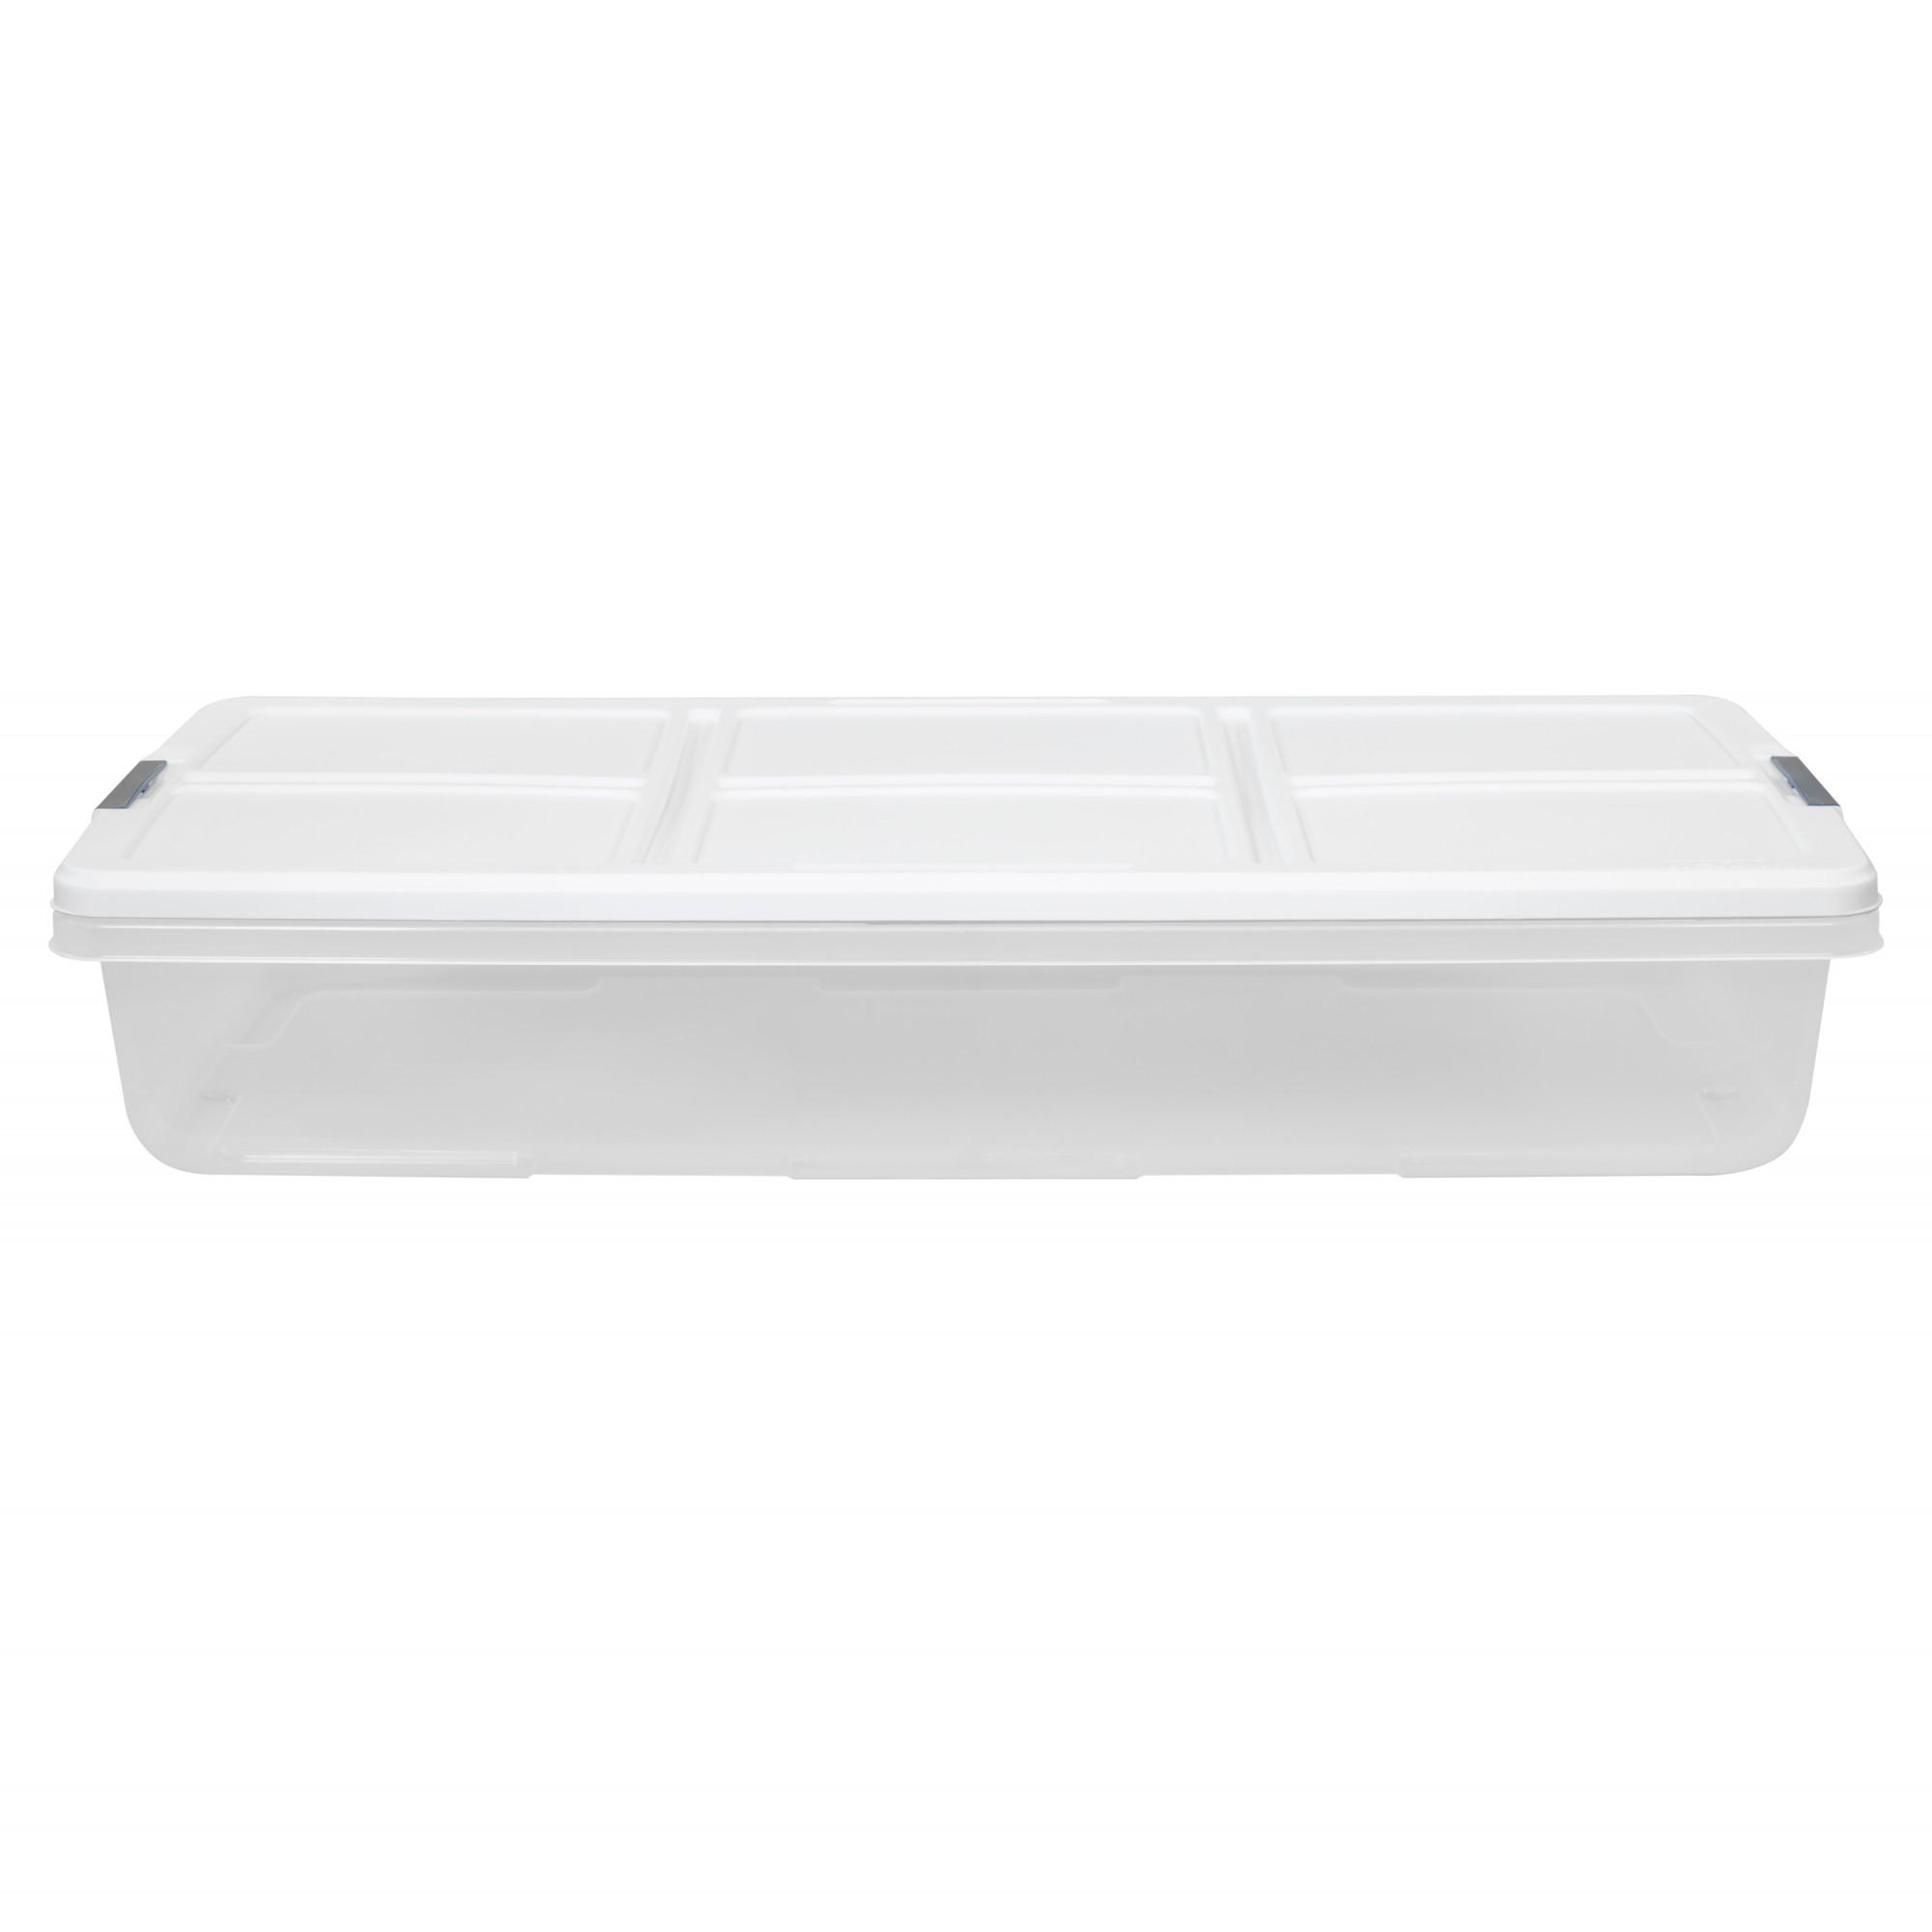 52-qt Hefty Latched Storage Bin, White Lid with Blue Handles - image 3 of 5